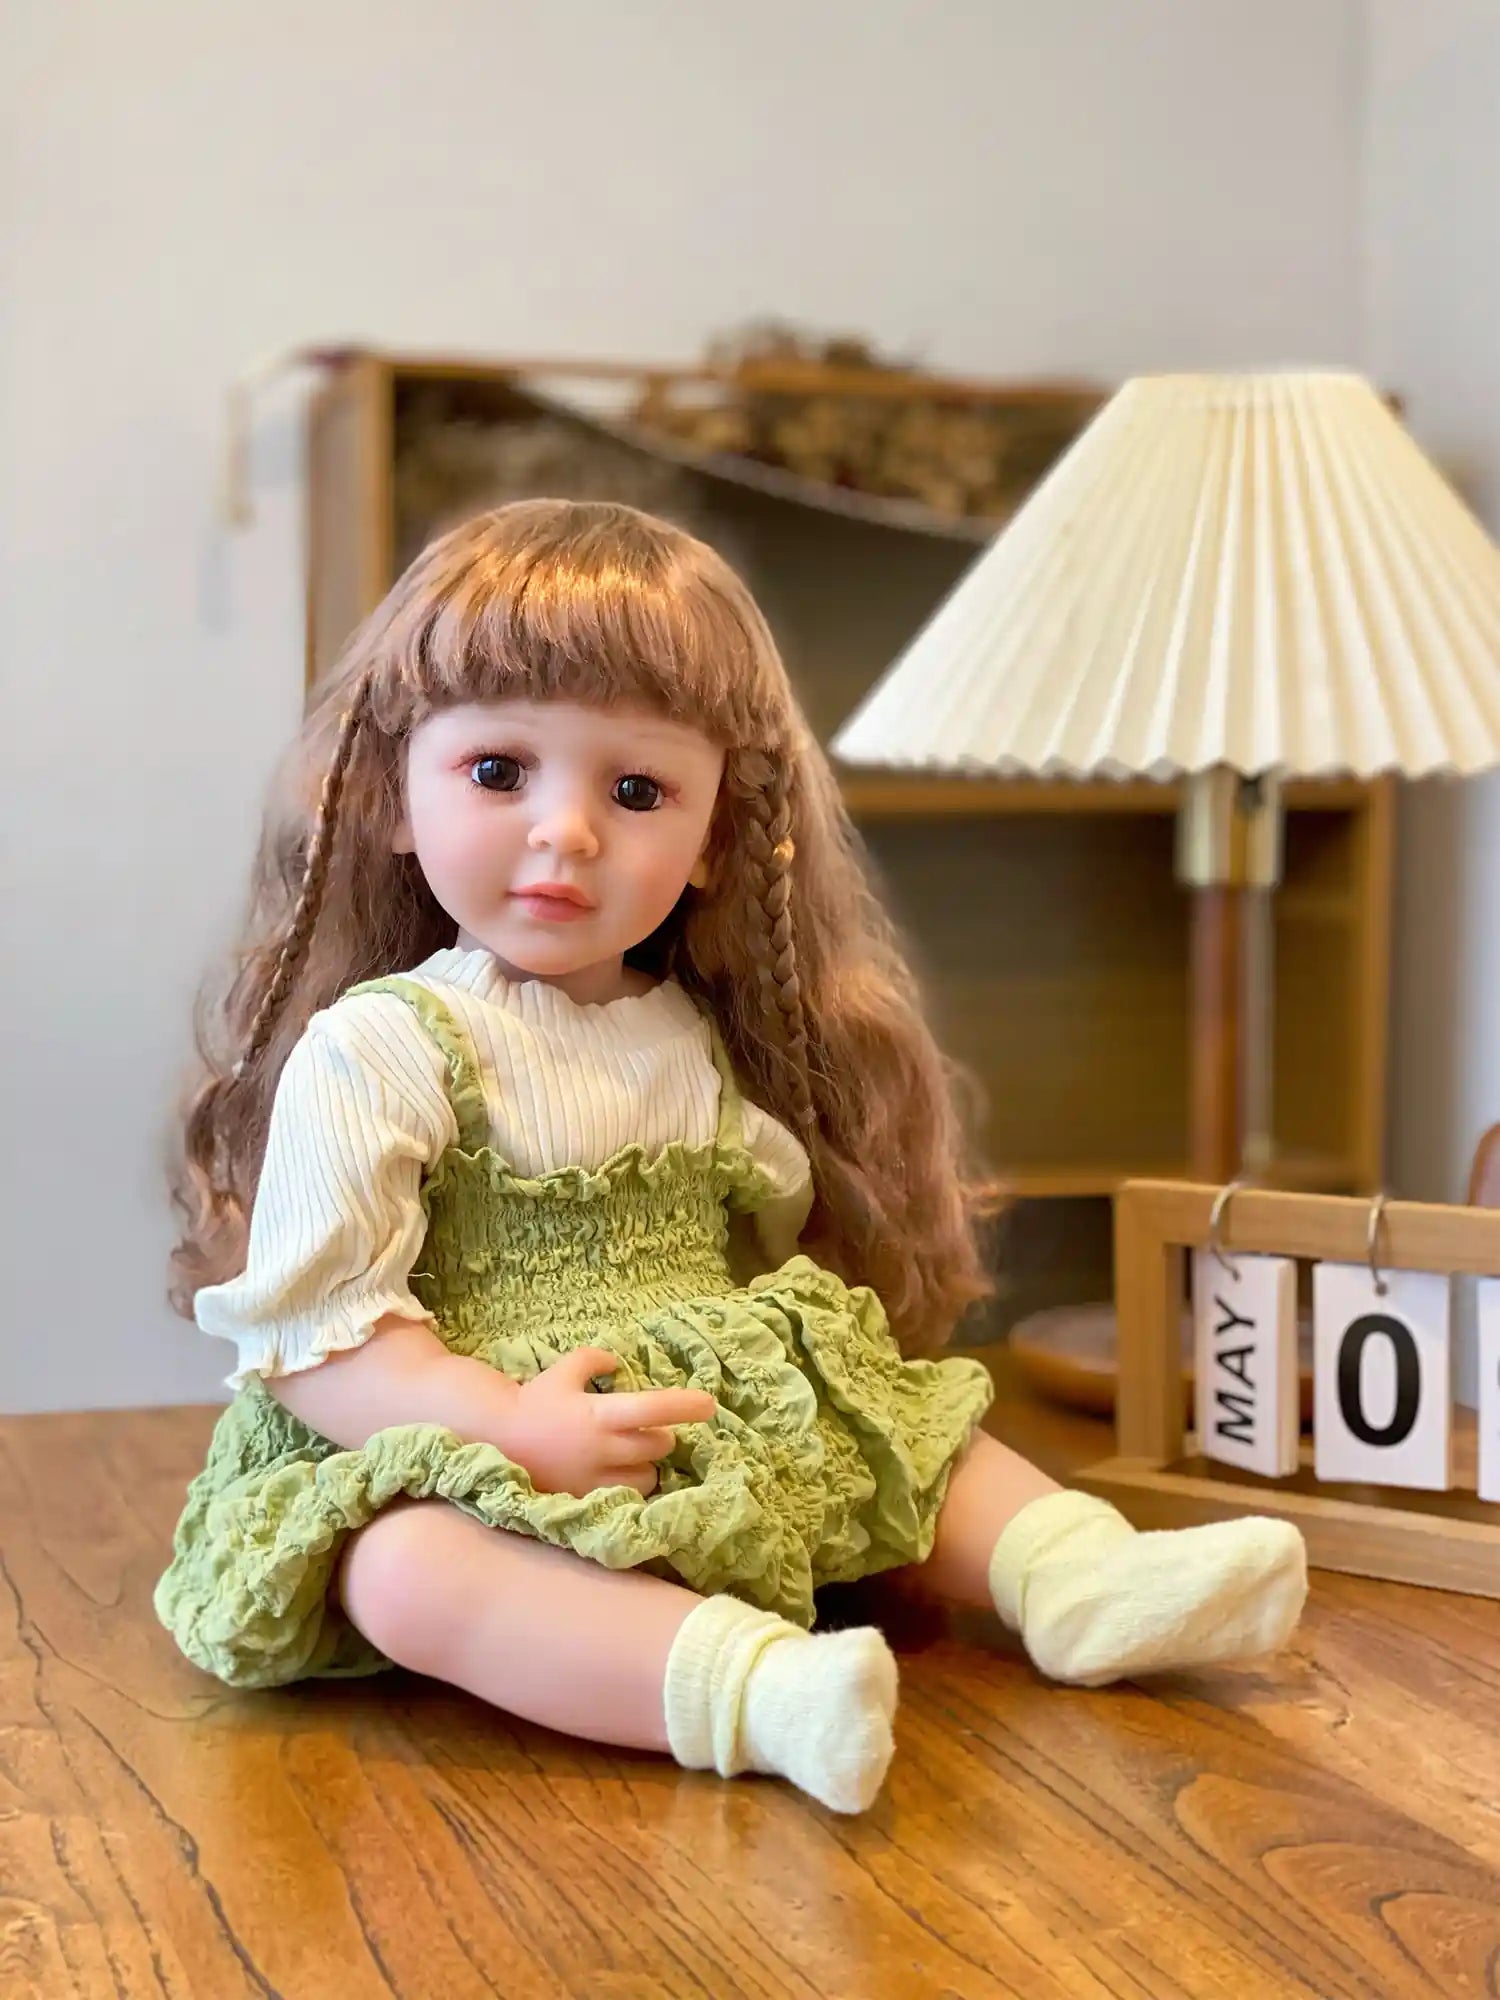 Realistic doll in green, sitting by a lamp and calendar on a wooden table.